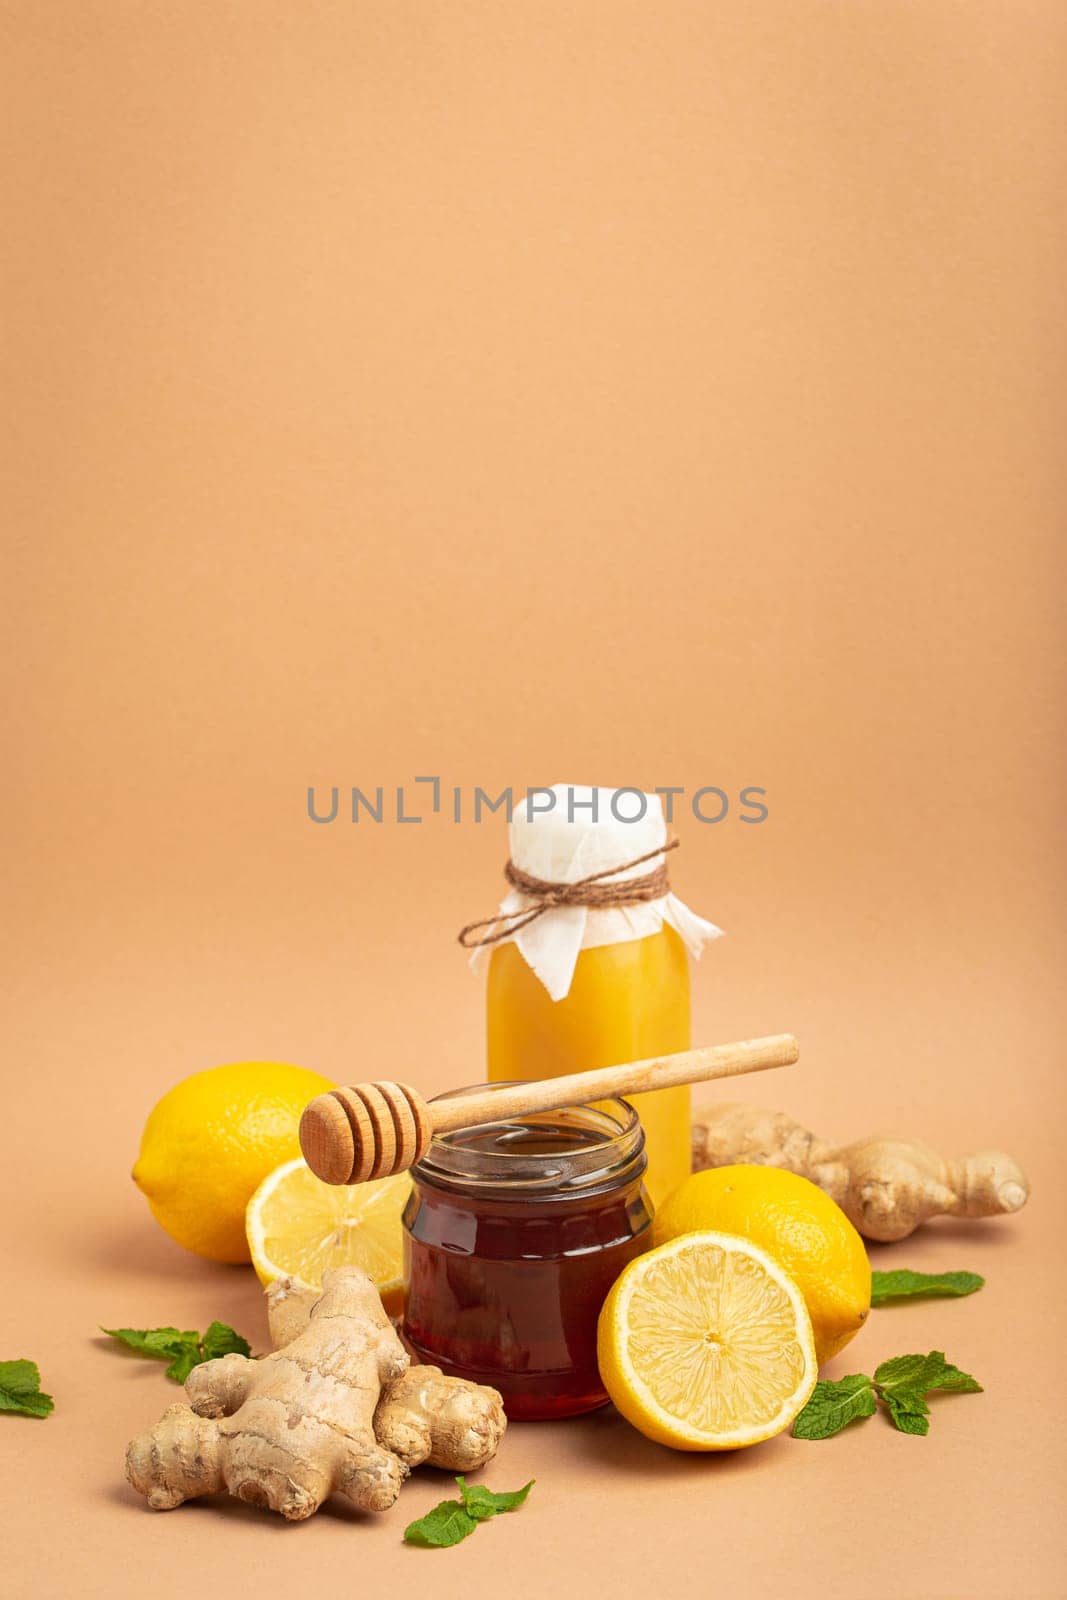 Composition with detox drink, sea buckthorn berries, lemons, mint, ginger, honey in glass jar. Food for immunity stimulation and against flu. Healthy natural remedies to boost immune system.